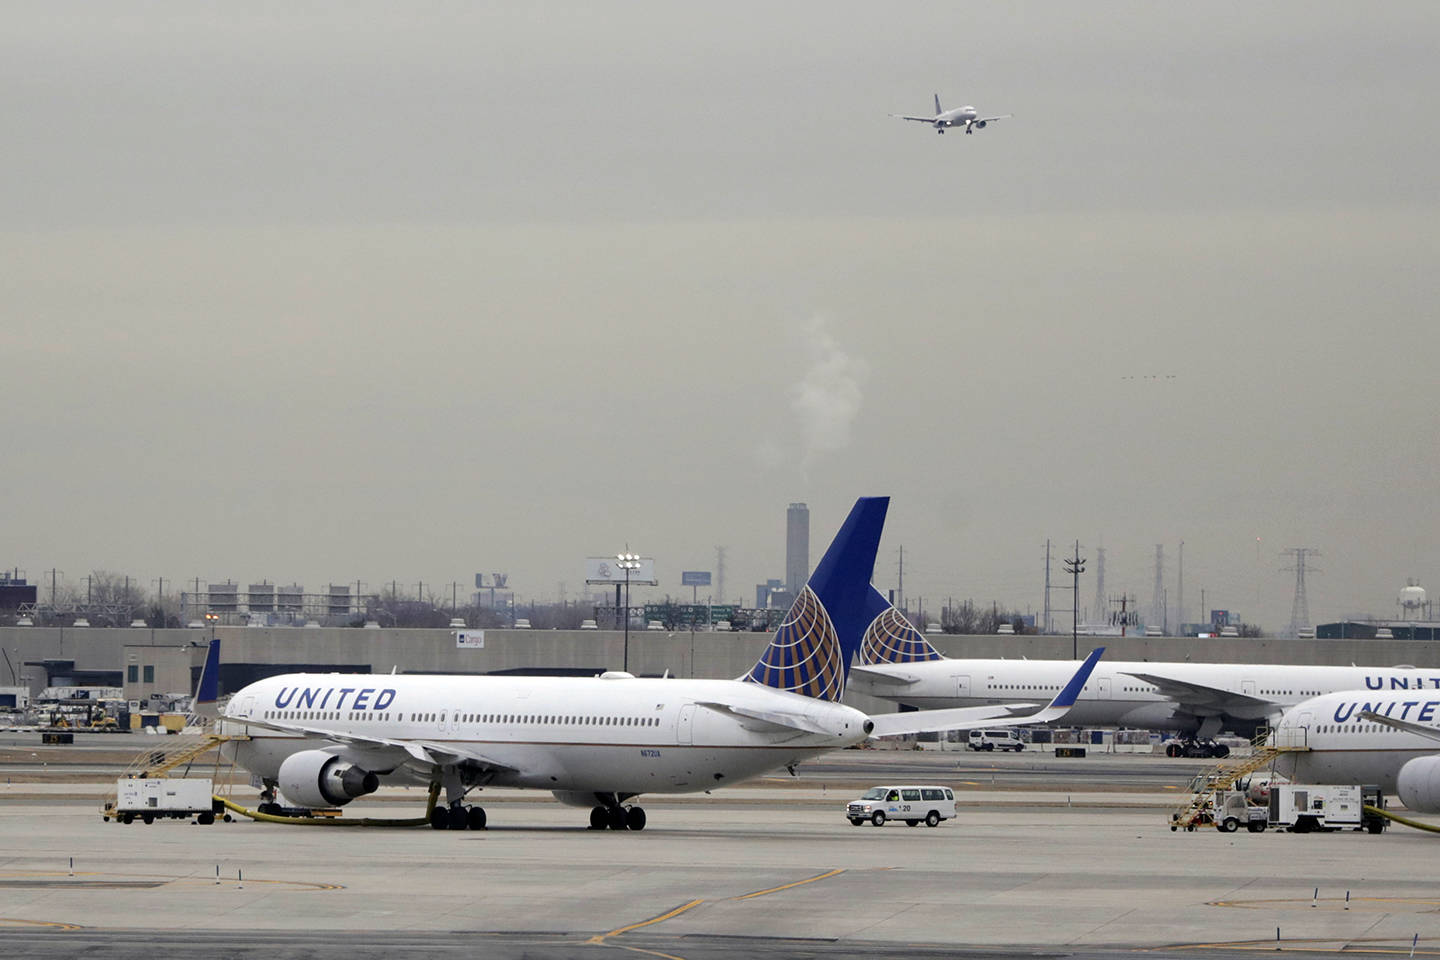 United courts the well-heeled with more premium seats